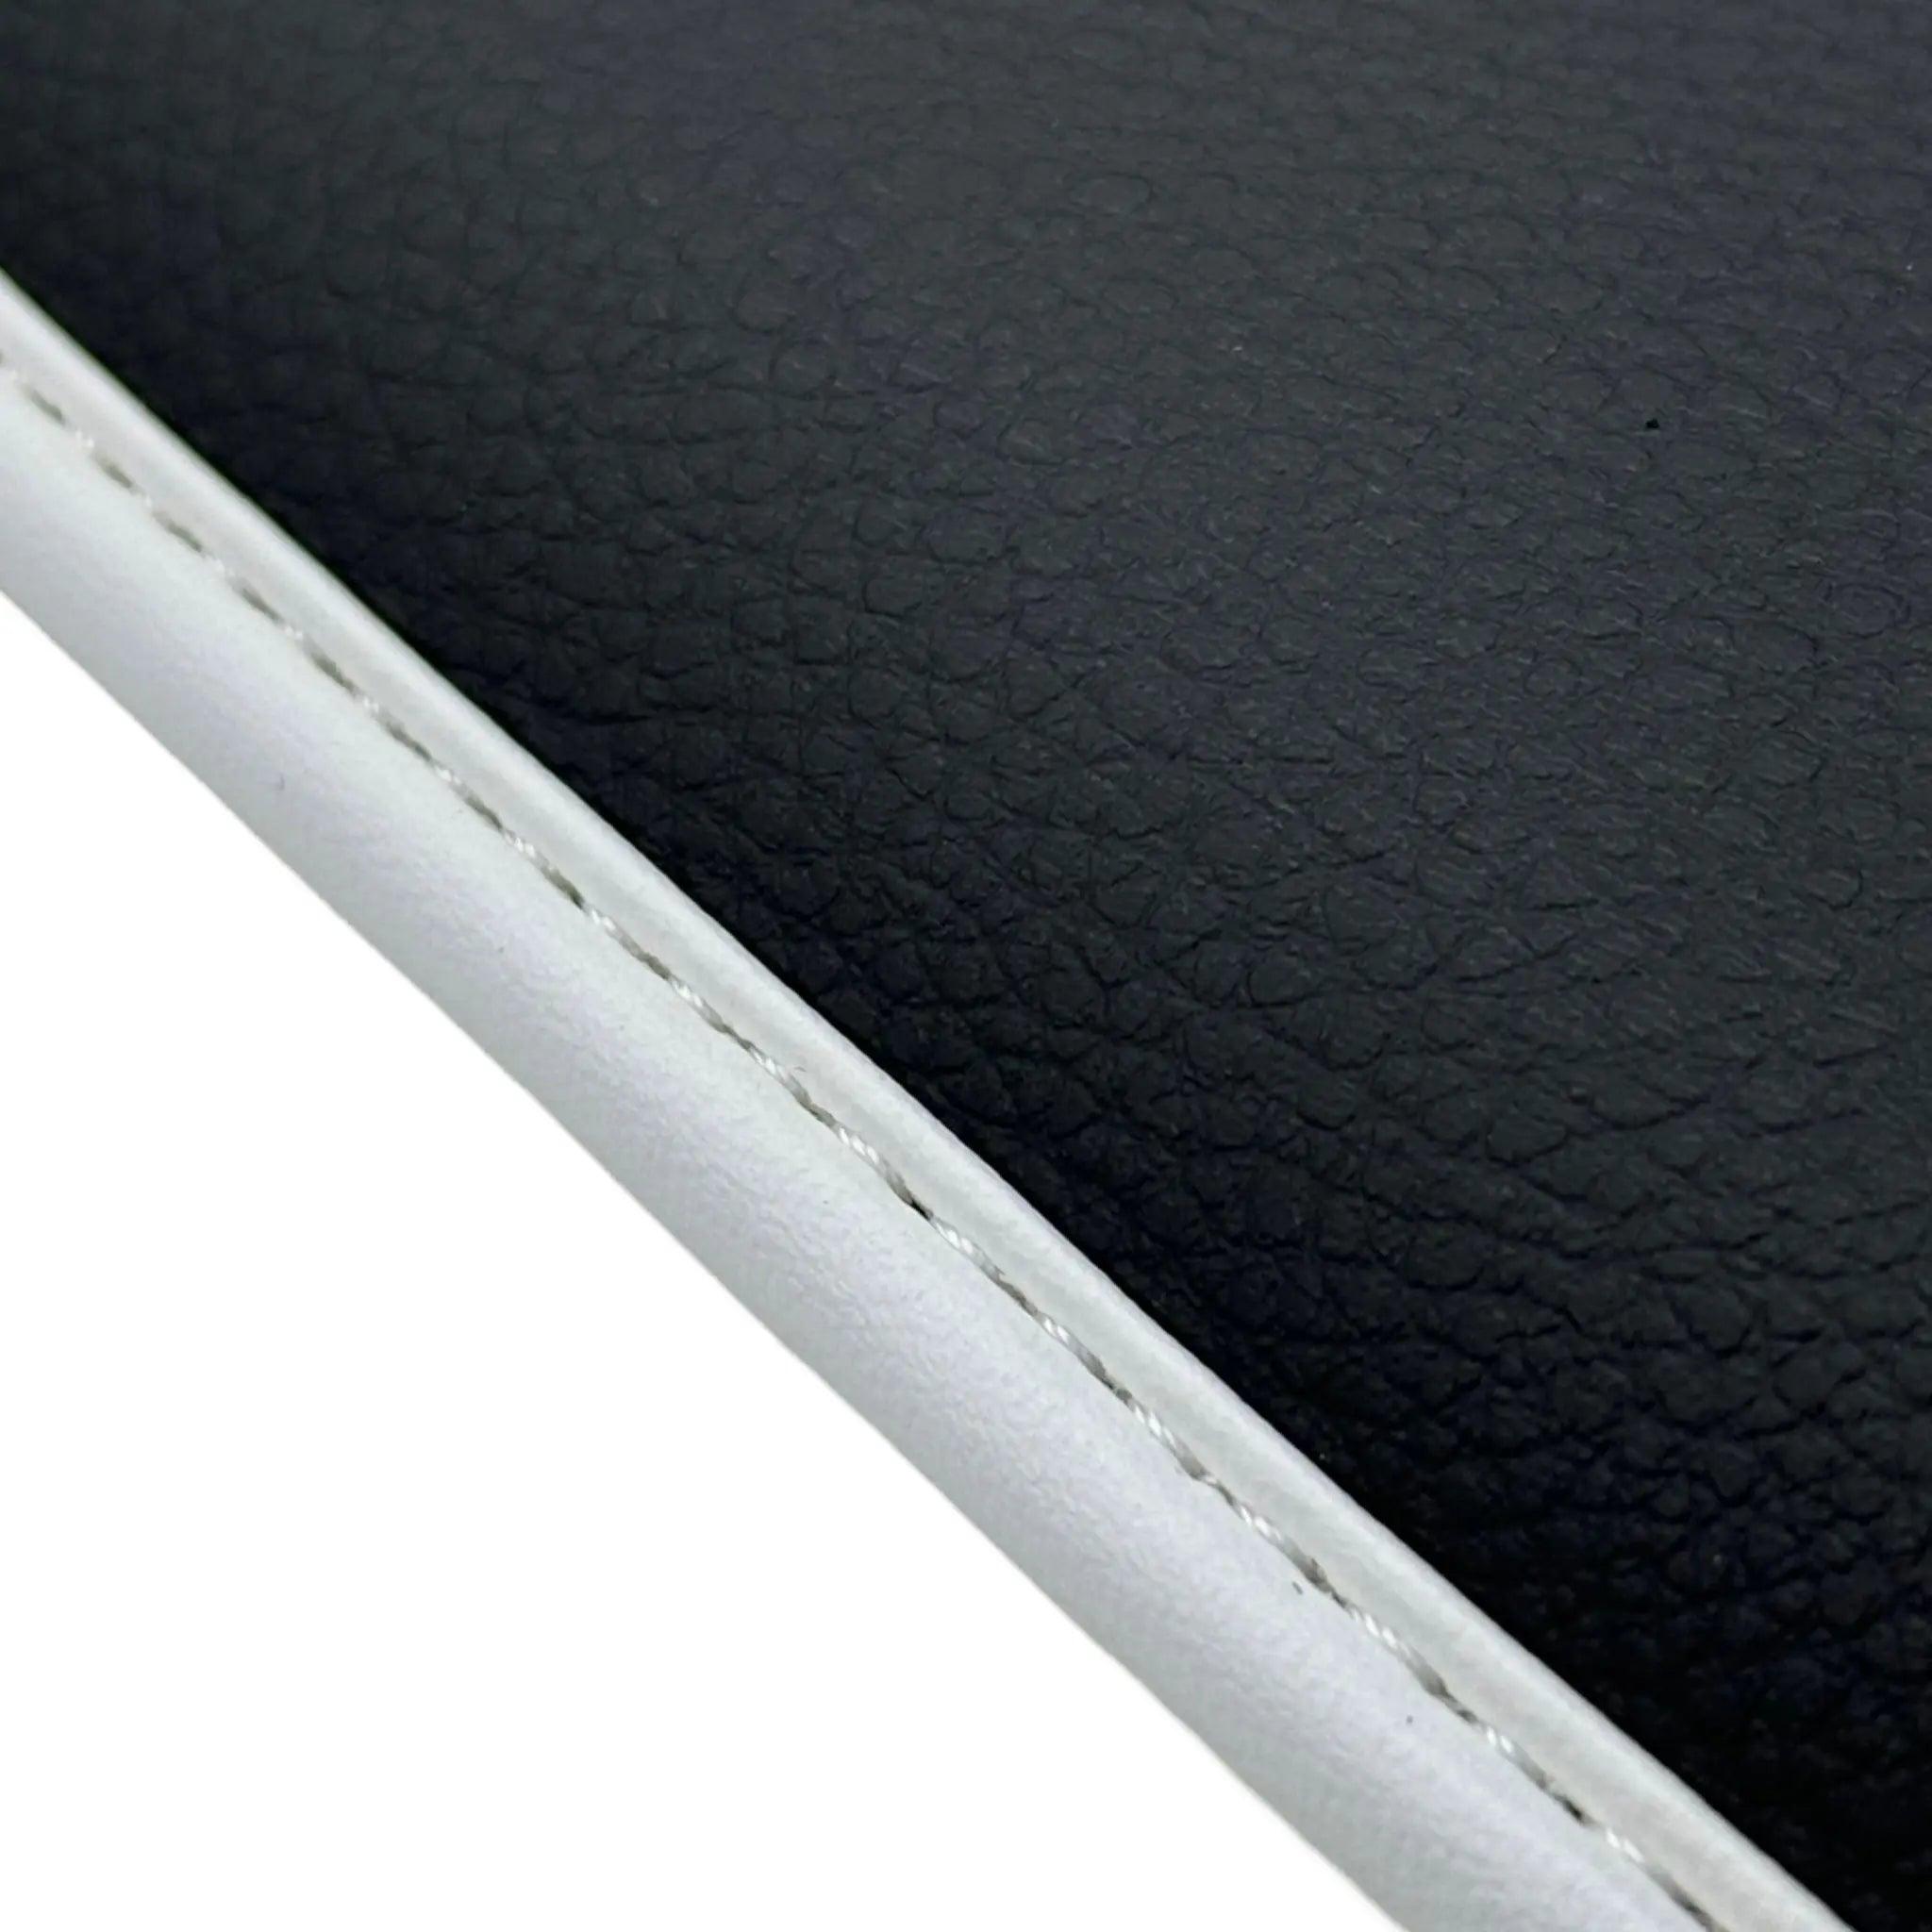 Leather Floor Mats for Ford Mustang GT350 Shelby (2015-2021) with Cobra Sewing | White Trim